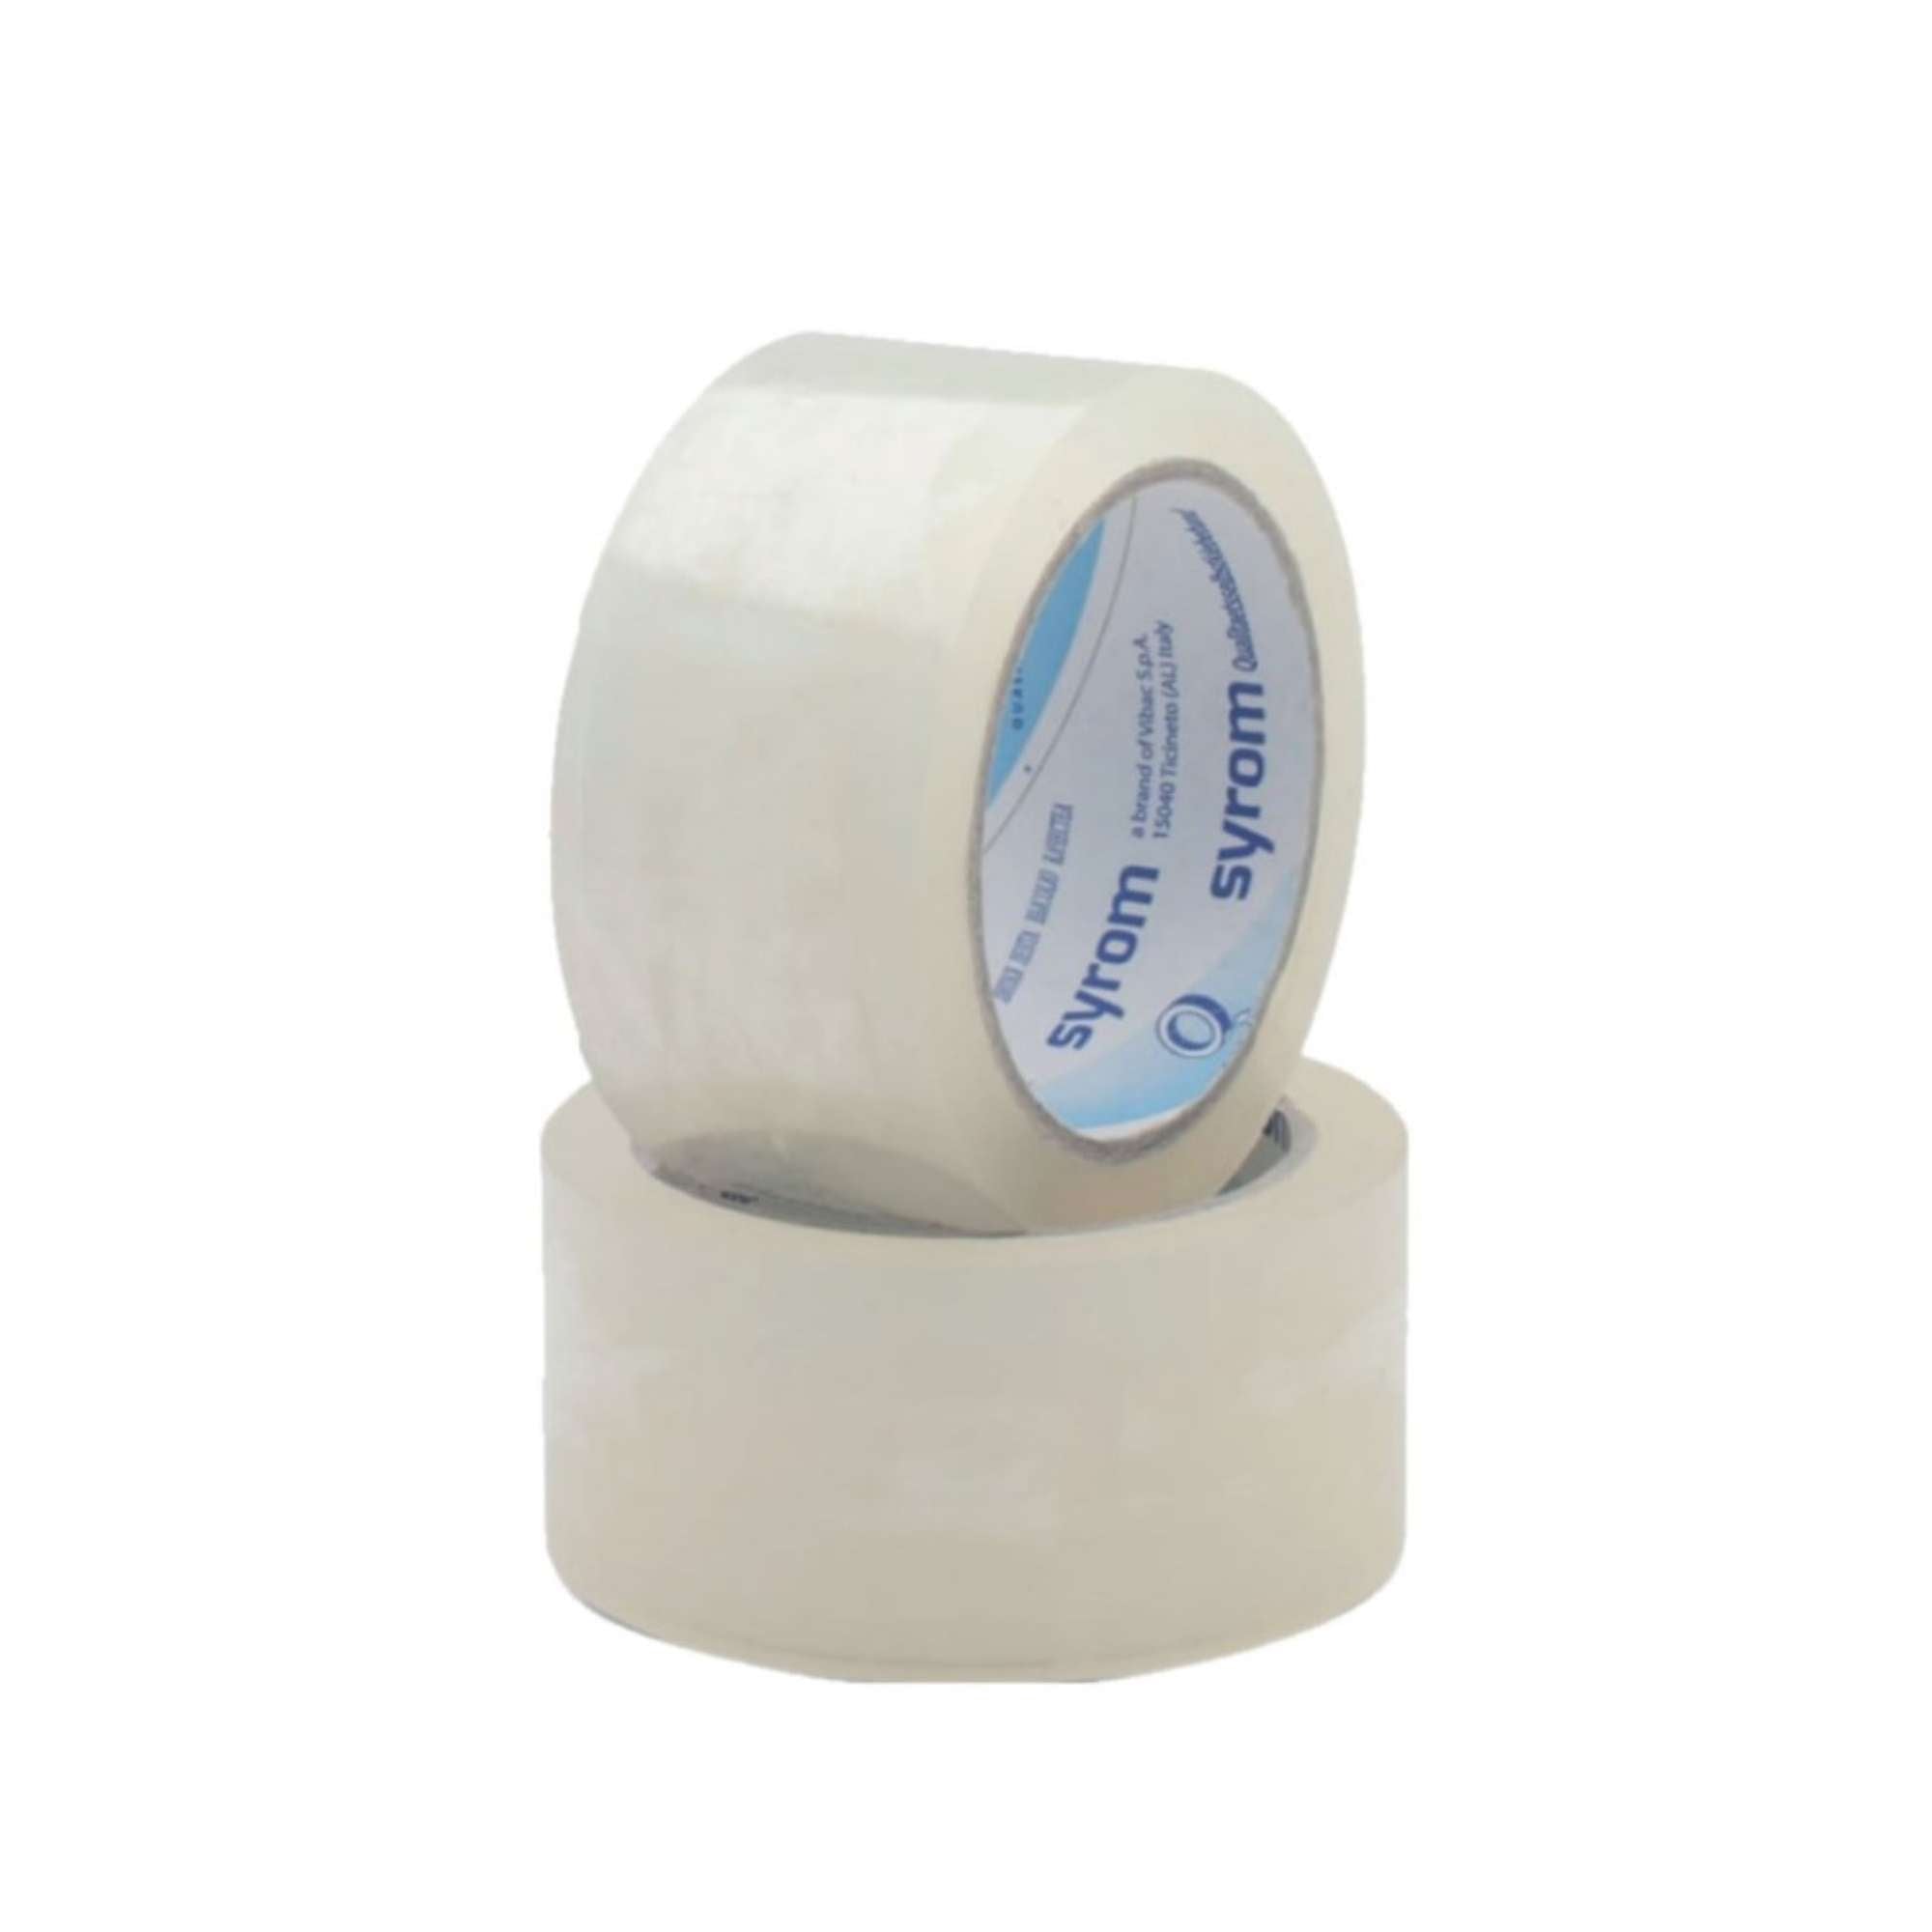 Self-adhesive tape for clear packaging 66m x 55mm - Syrom 9900